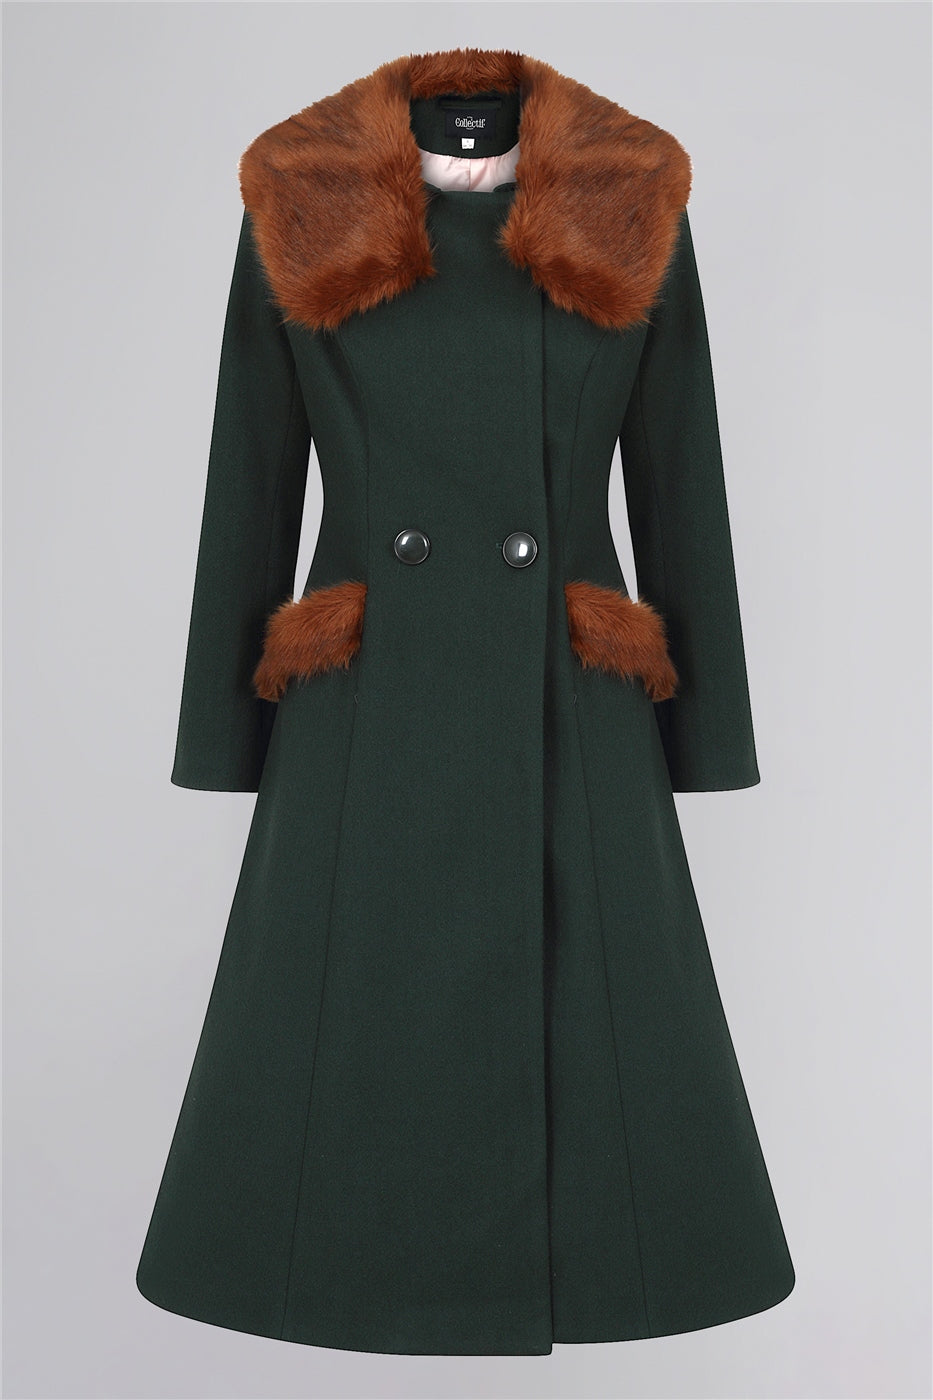 dark green 40s style women's coat with brown faux fur trim pockets and collar and two front buttons